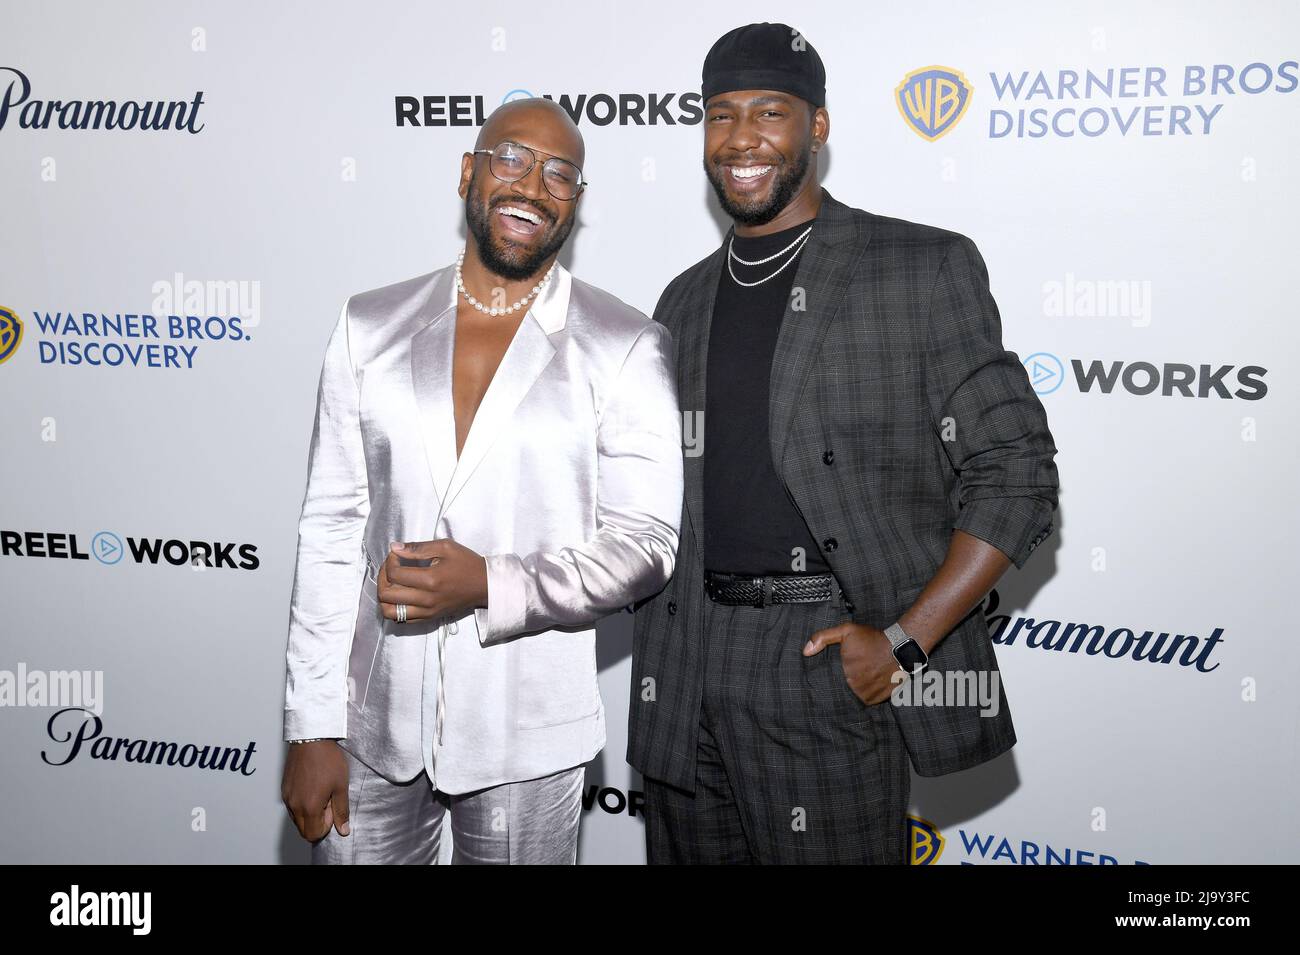 New York, USA. 25th May, 2022. (L-R) Bryan Terrell Clark and Devario Simmons attend the Real Works 2022 Changemakers Gala at Tribeca 360 in New York, NY, May 25, 2022. (Photo by Anthony Behar/Sipa USA) Credit: Sipa USA/Alamy Live News Stock Photo